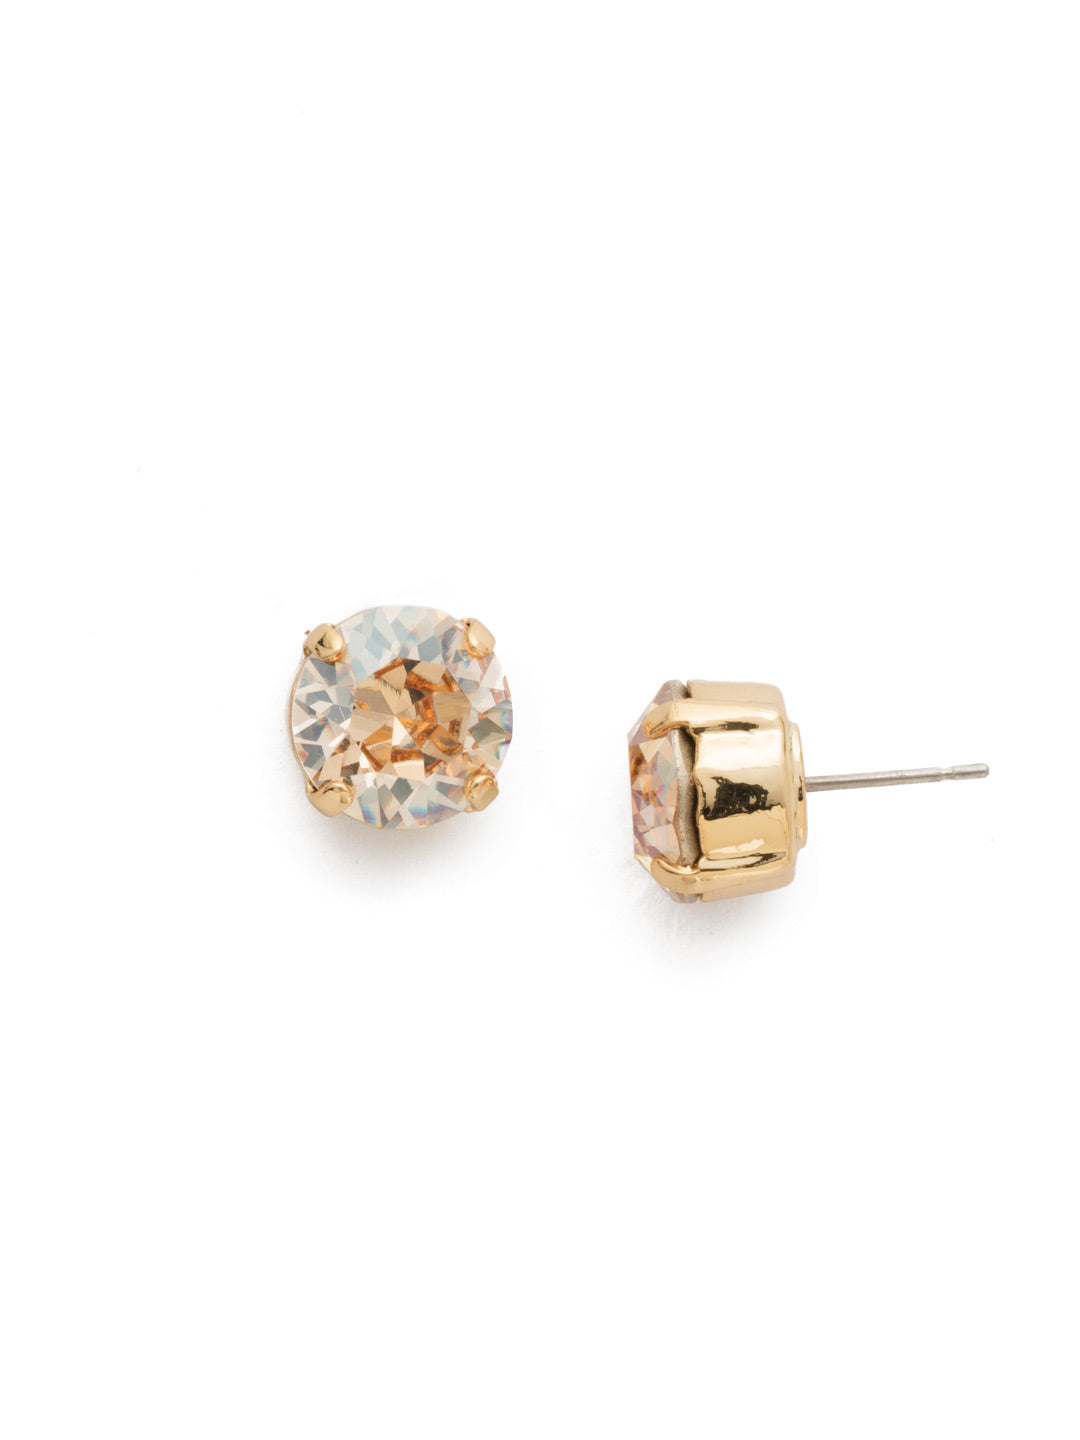 London Stud Earrings - ECM14BGDCH - <p>Everyone needs a great pair of studs. Add some classic sparkle to any occasion with these stud earrings. Need help picking a stud? <a href="https://www.sorrelli.com/blogs/sisterhood/round-stud-earrings-101-a-rundown-of-sizes-styles-and-sparkle">Check out our size guide!</a> From Sorrelli's Dark Champagne collection in our Bright Gold-tone finish.</p>